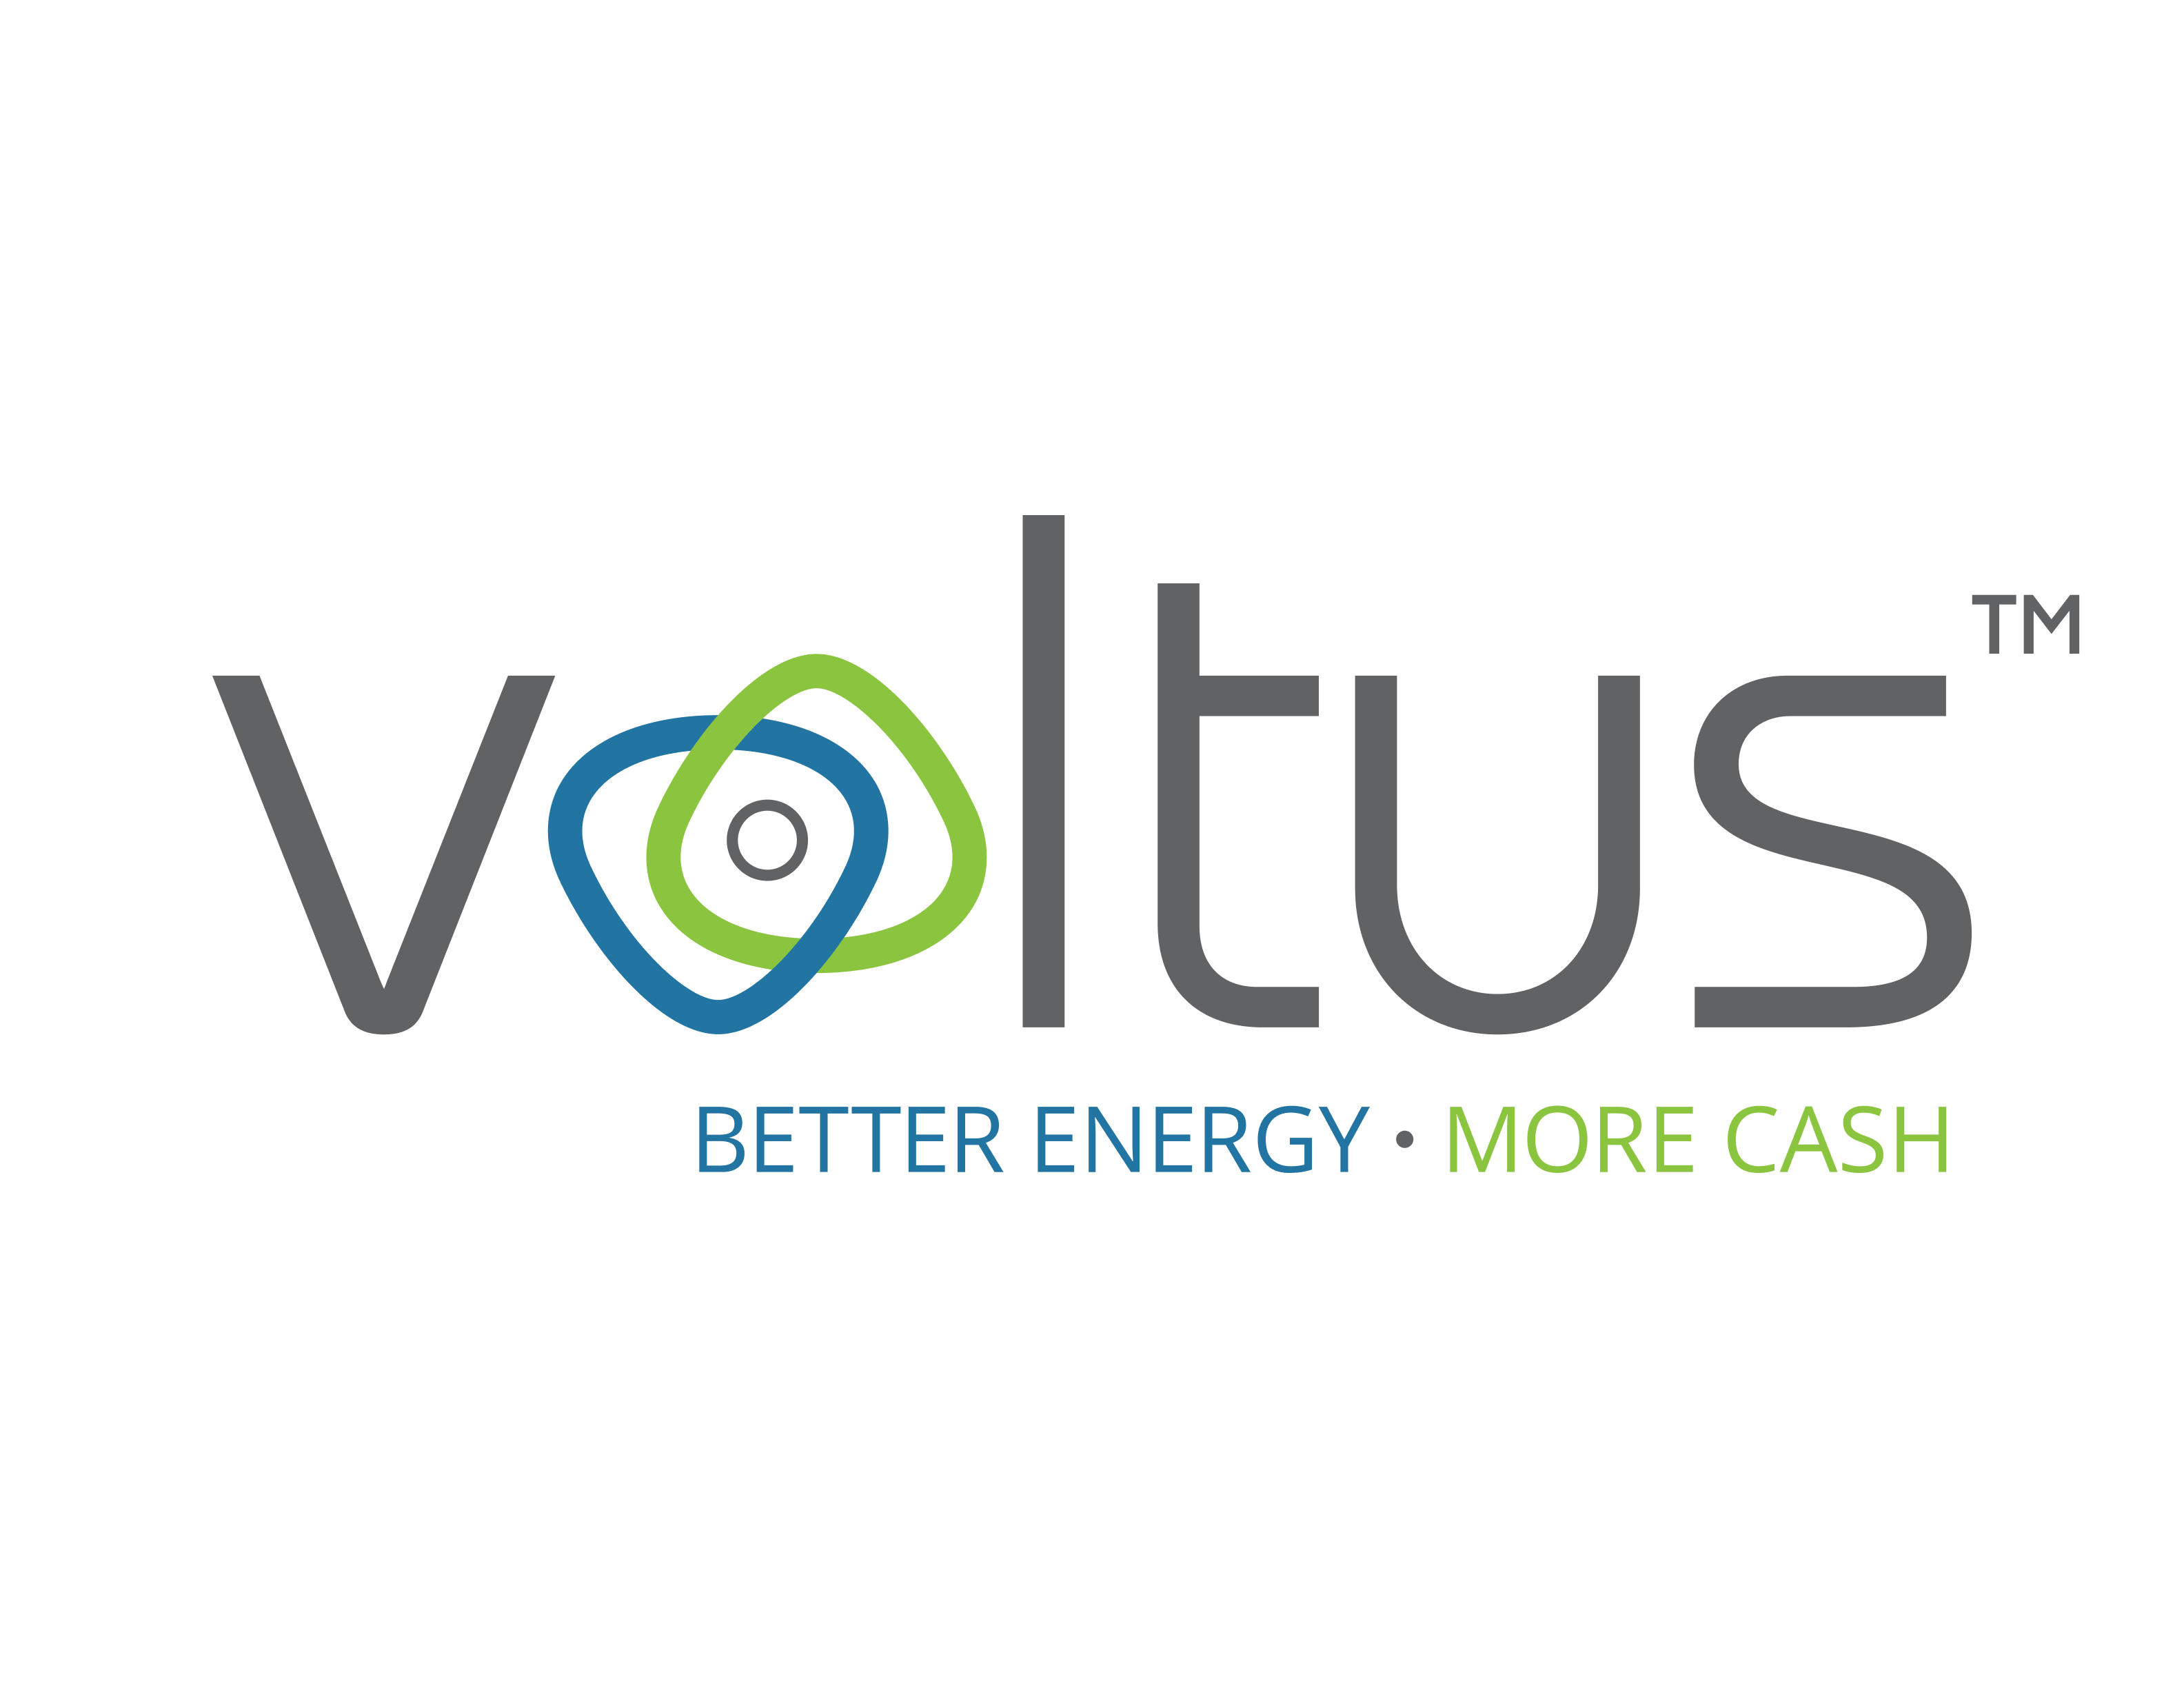 ASM Global’s Conversion Of U.S. Venues Into Most Sustainable Portfolio In The World Continues With Voltus Partnership